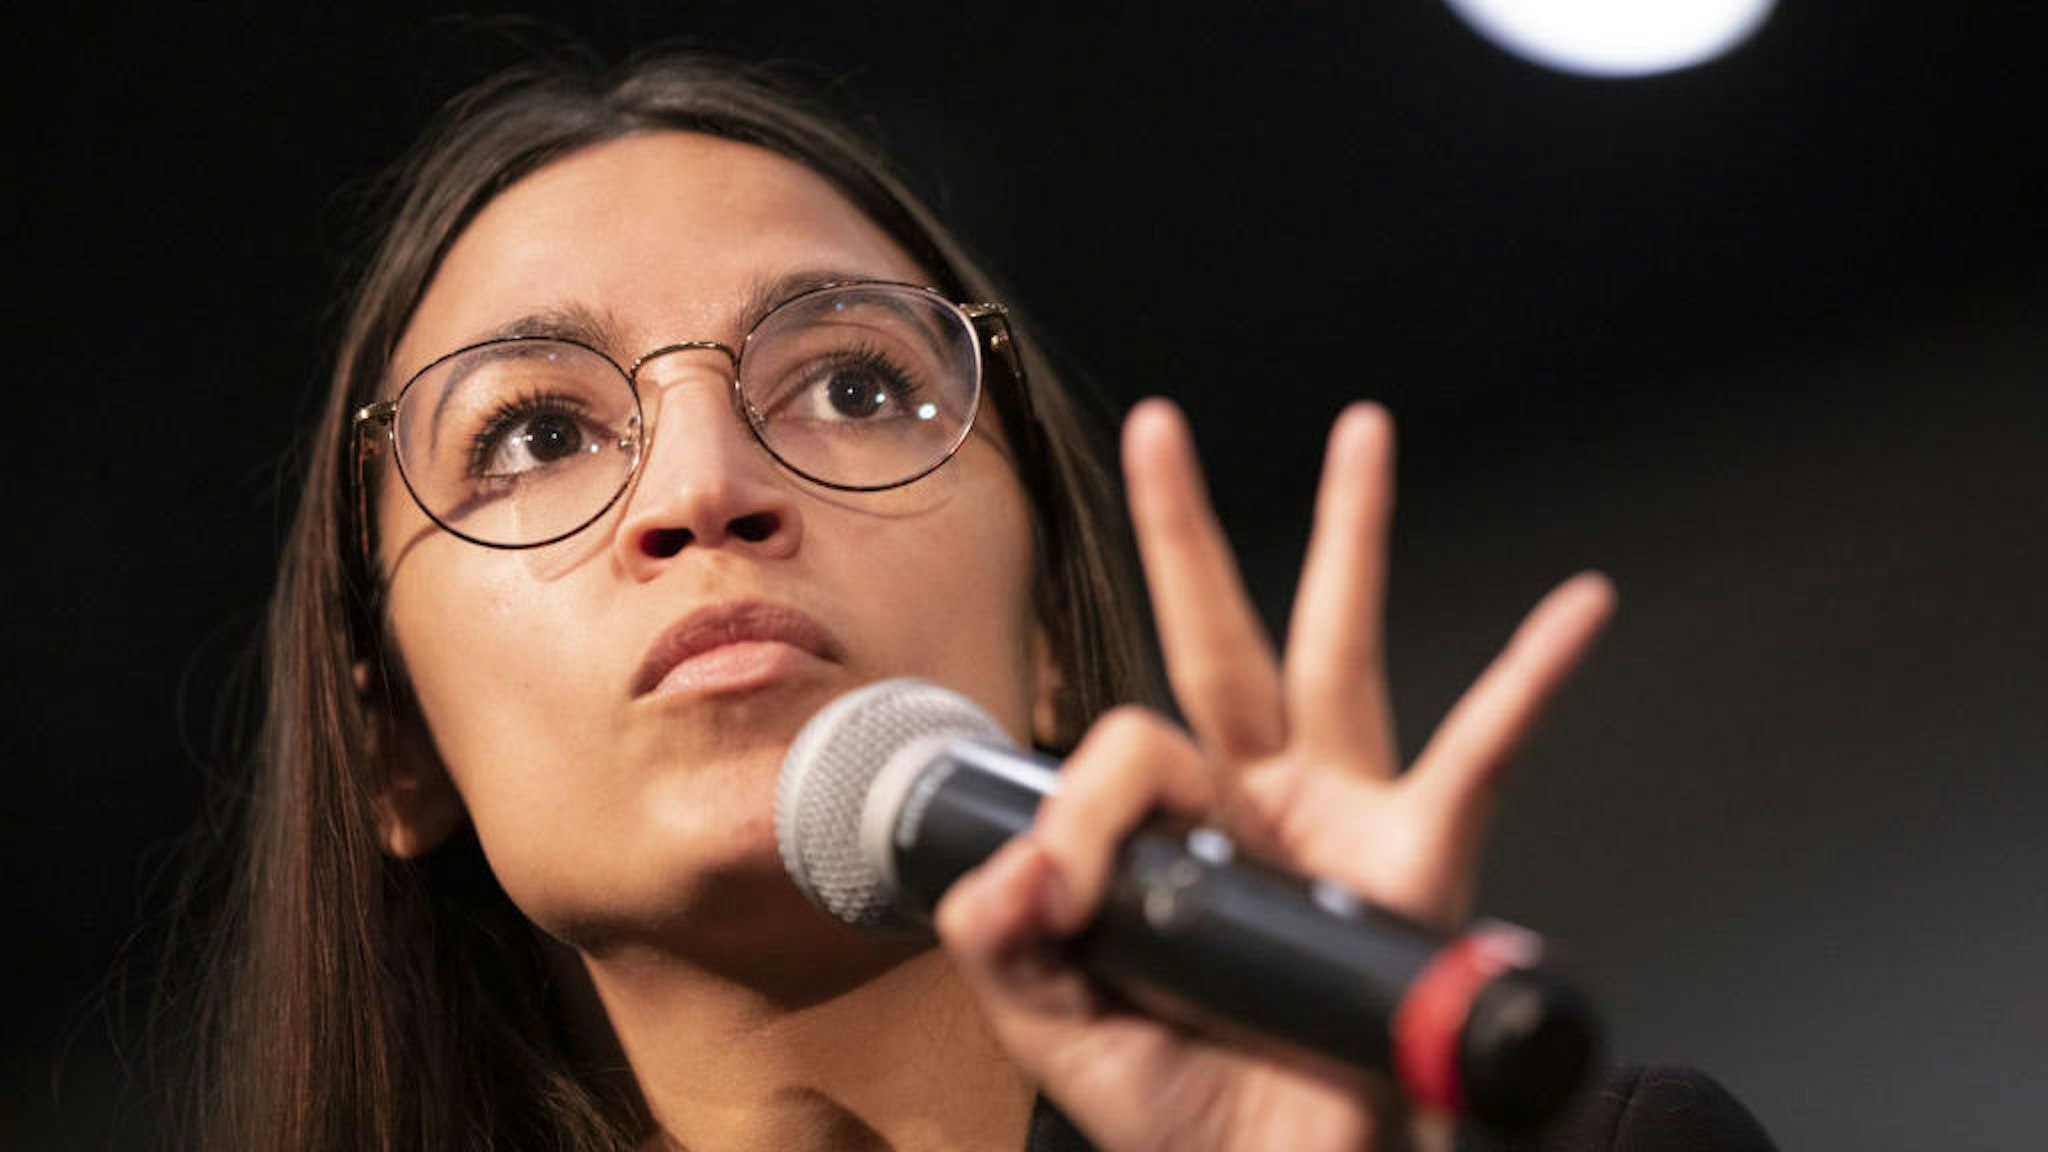 U.S. Representative Alexandria Ocasio-Cortez, a democrat from New York, speaks during a campaign rally for Senator Bernie Sanders, an independent from Vermont and 2020 presidential candidate, not pictured, in Sioux City, Iowa, U.S., on Sunday, Jan. 26, 2020. New polls showed the unsettled state of the Democratic primary days before the first voters weigh in at the Iowa caucuses, with front-runner status still unclear. Photographer: Daniel Acker/Bloomberg